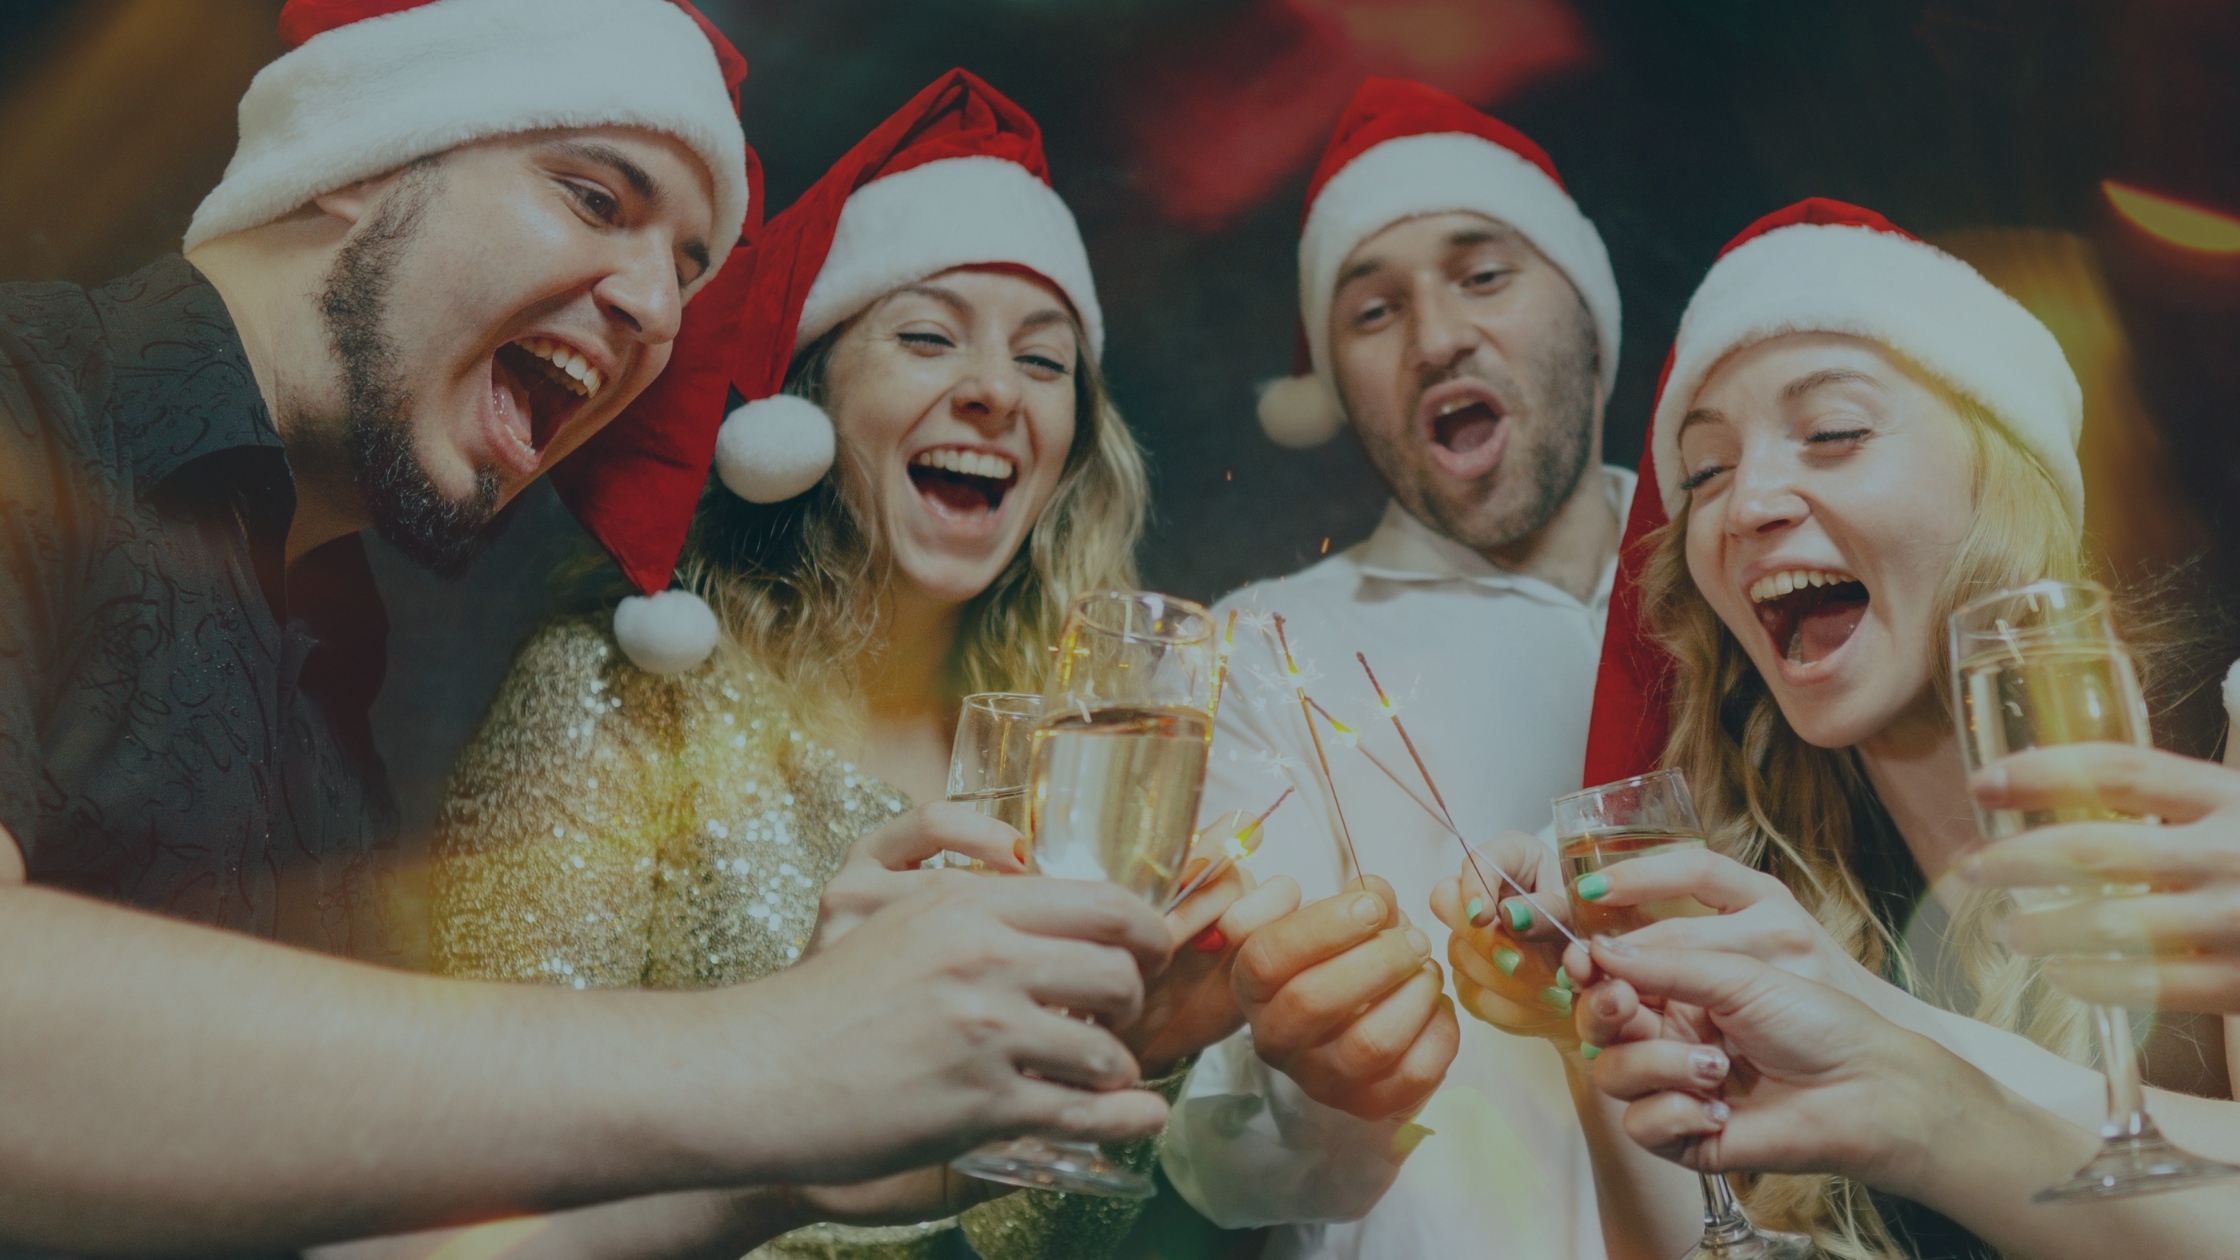 How to avoid the festive fear this Christmas Work party